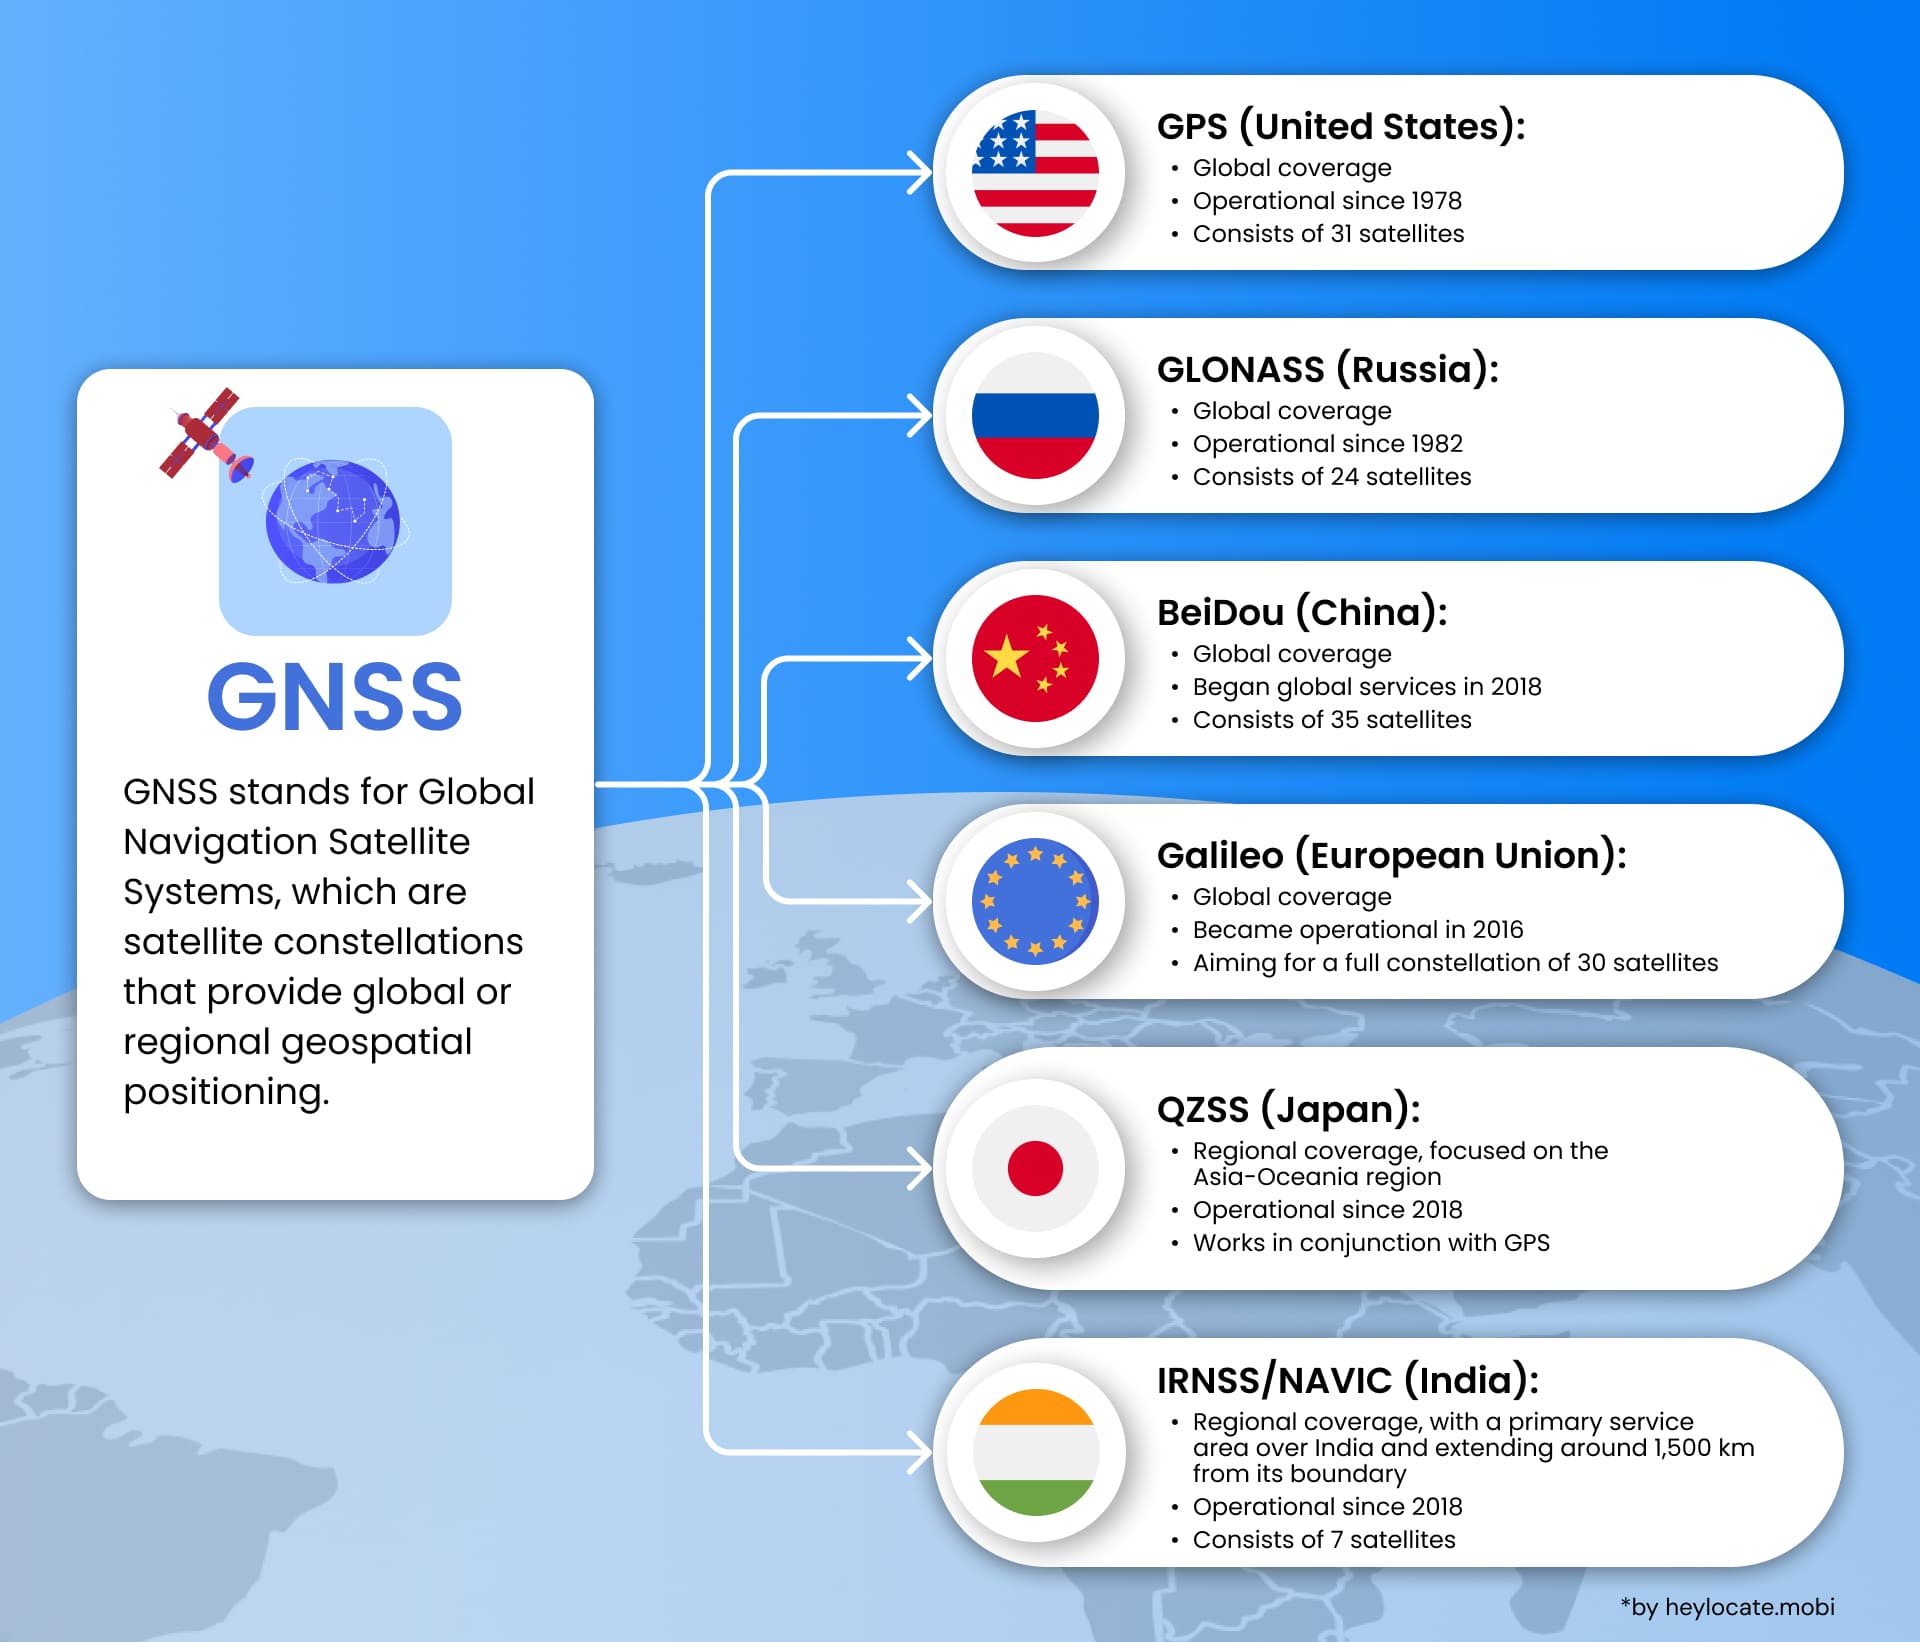 Definition of what is Global Navigation Satellite Systems (GNSS), and their types with countries and brief descriptions of these systems